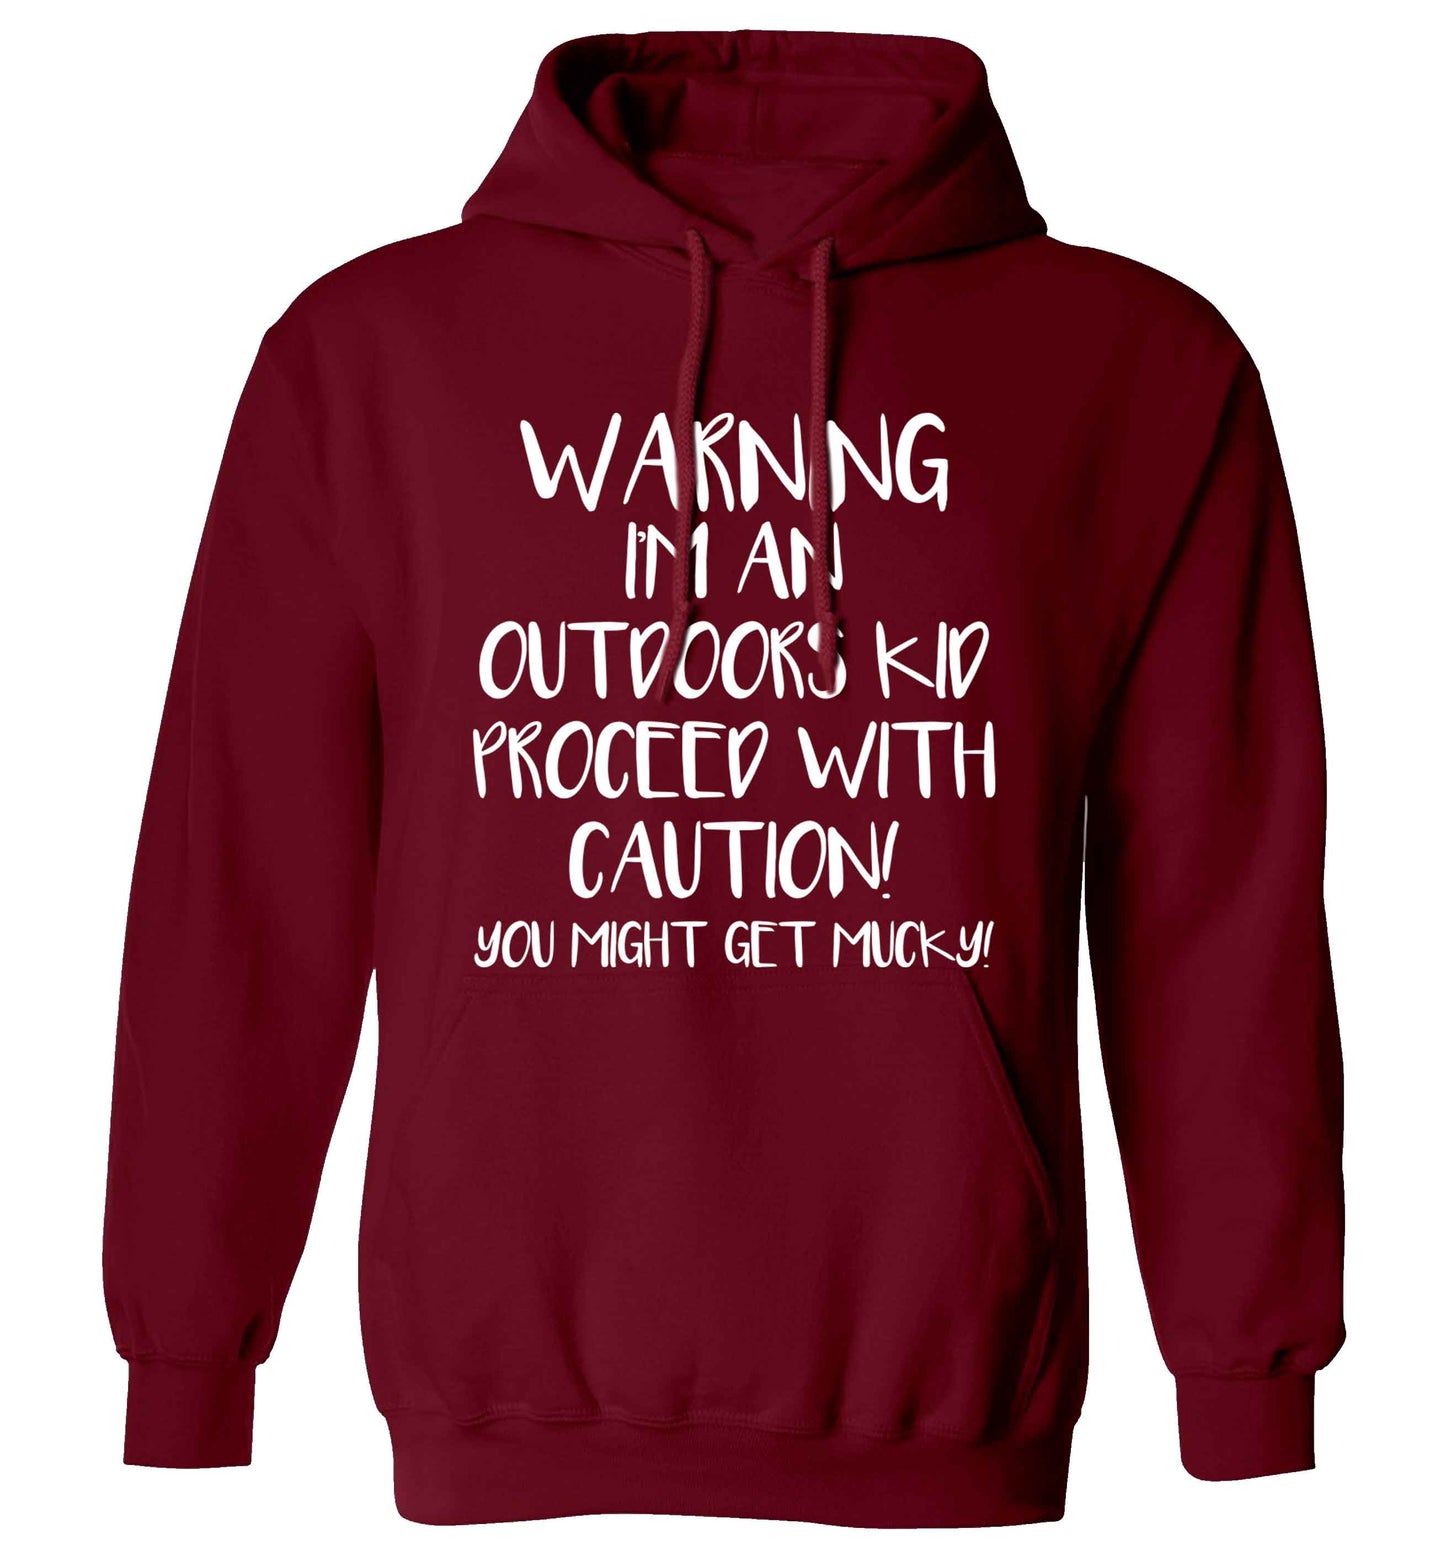 Warning I'm an outdoors kid! Proceed with caution you might get mucky adults unisex maroon hoodie 2XL